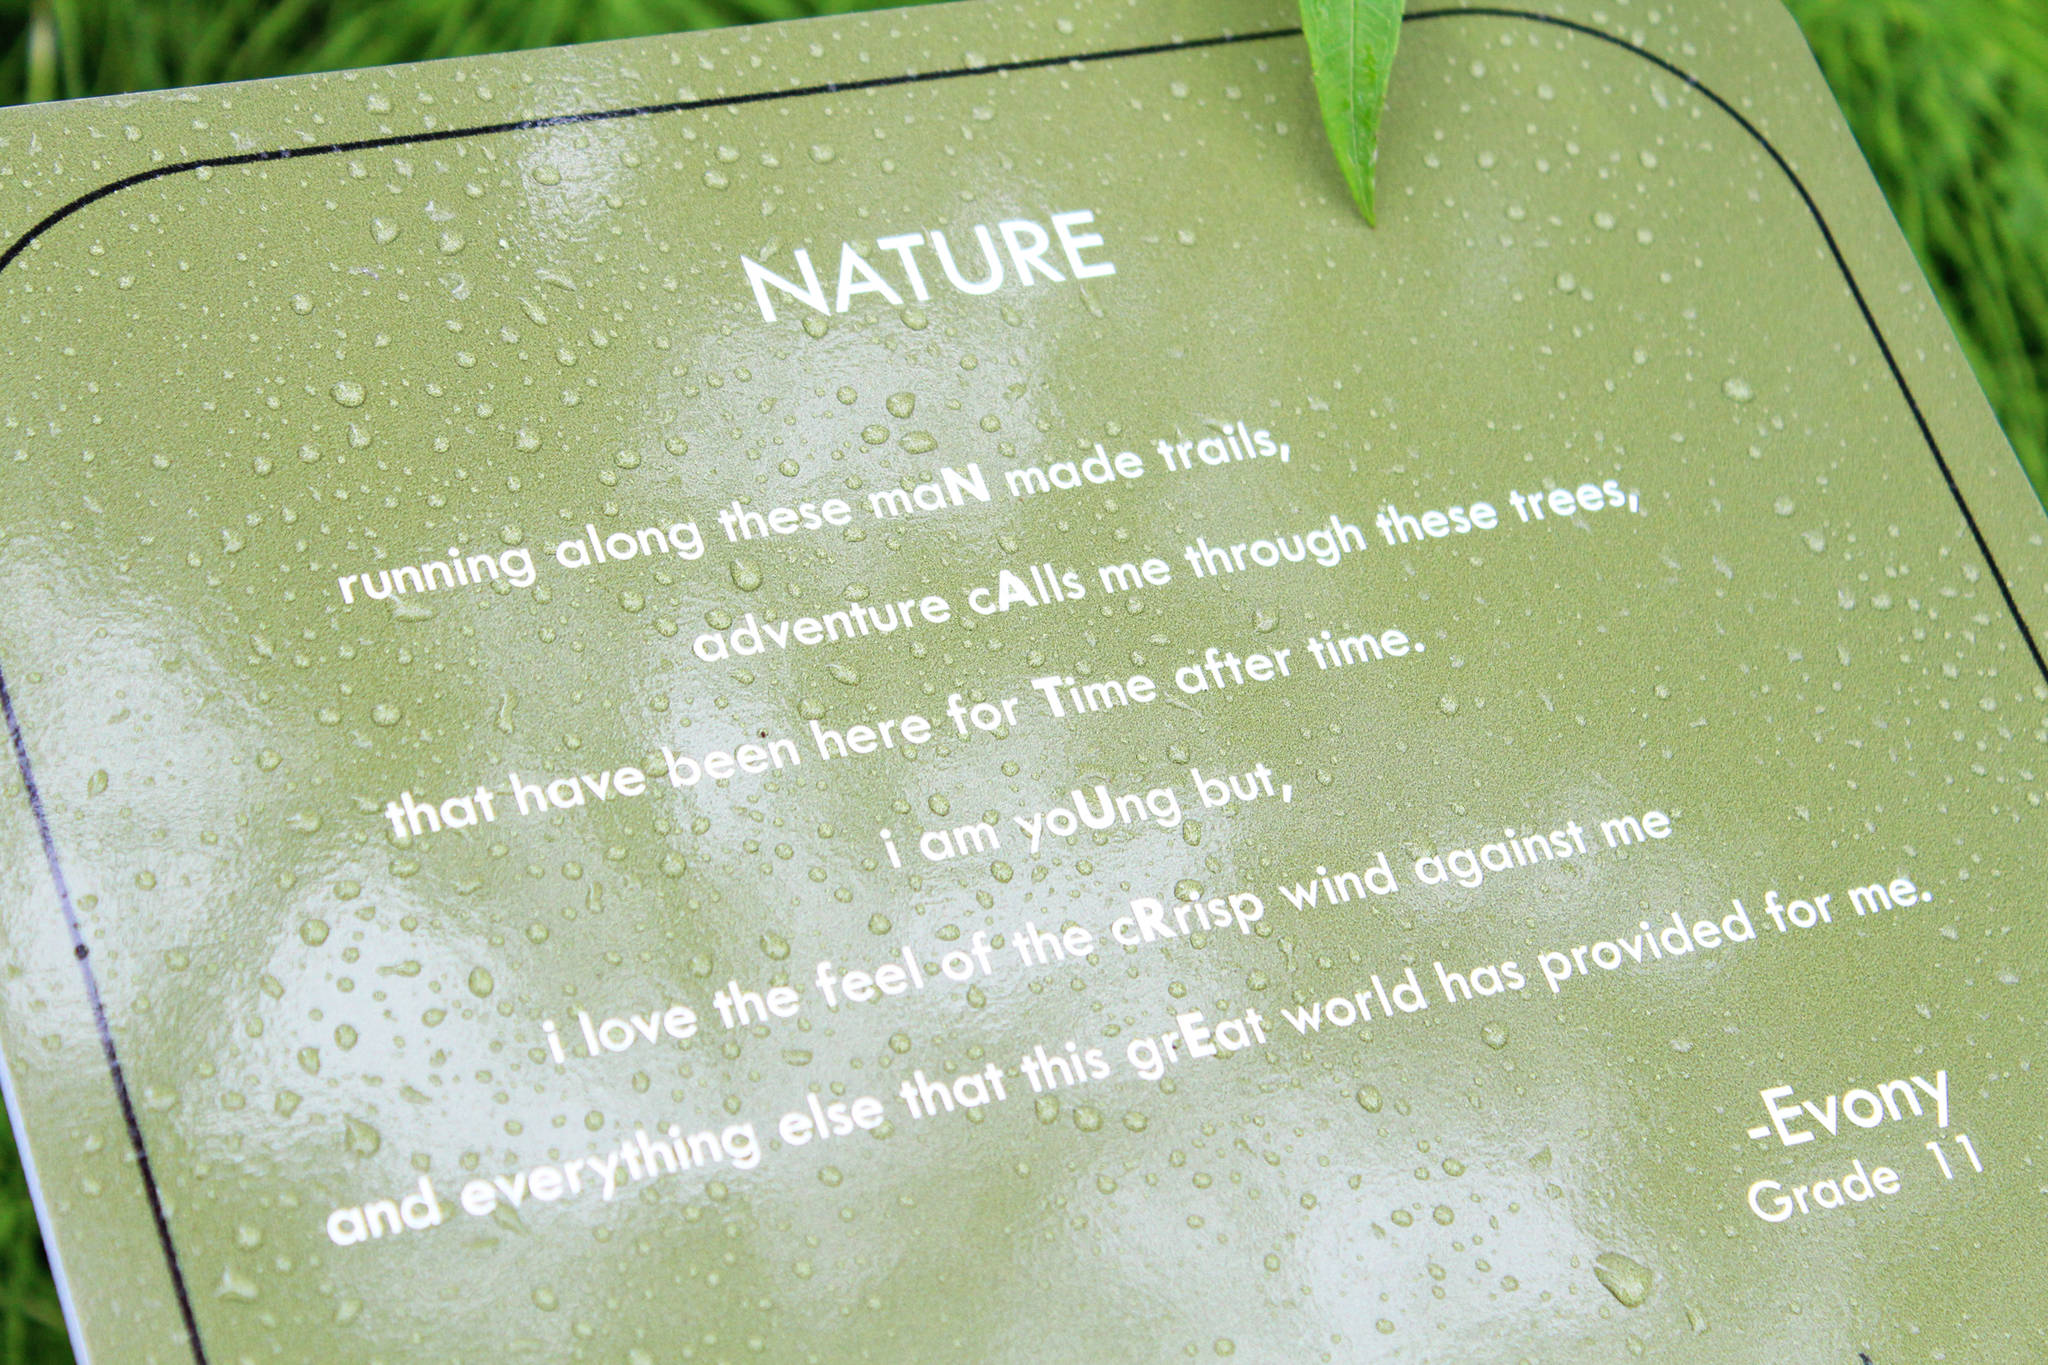 The poem “Nature” is displayed on a sign Saturday, July 1, 2017 on the trail at Kenai Municipal Park in Kenai, Alaska. The sign is one of 12 along the trail displaying the winning poems about nature chosen from 86 entries in the Pathways of Poetry project, spearheaded by the Kenai Parks and Recreation Department and Kenai Community Library. (Photo by Megan Pacer/Peninsula Clarion)